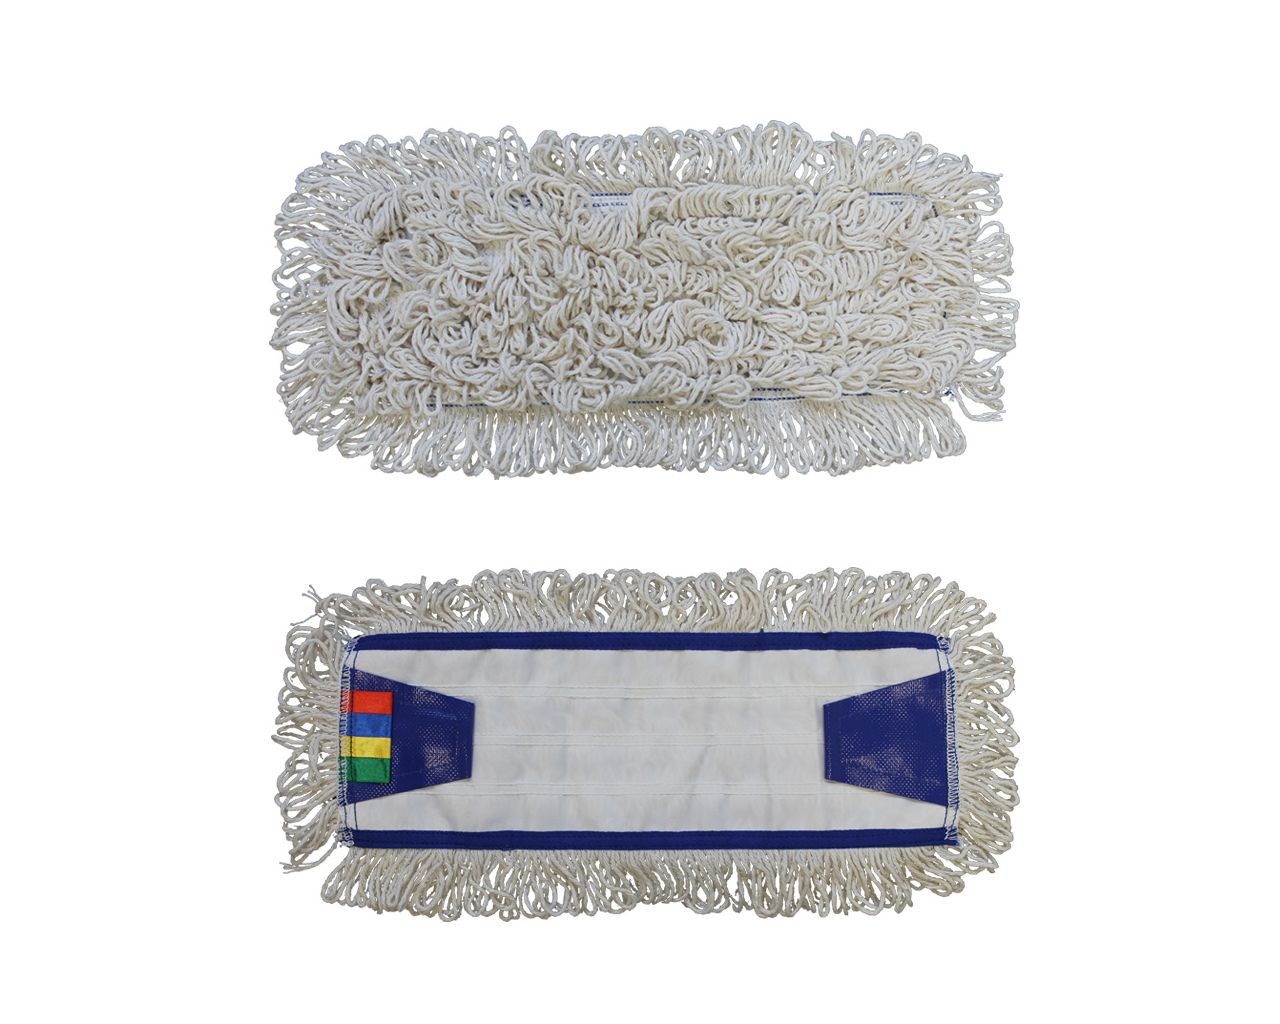 STANDARD cotton mop 40 cm with flaps, suitable for ST022 & HFF101